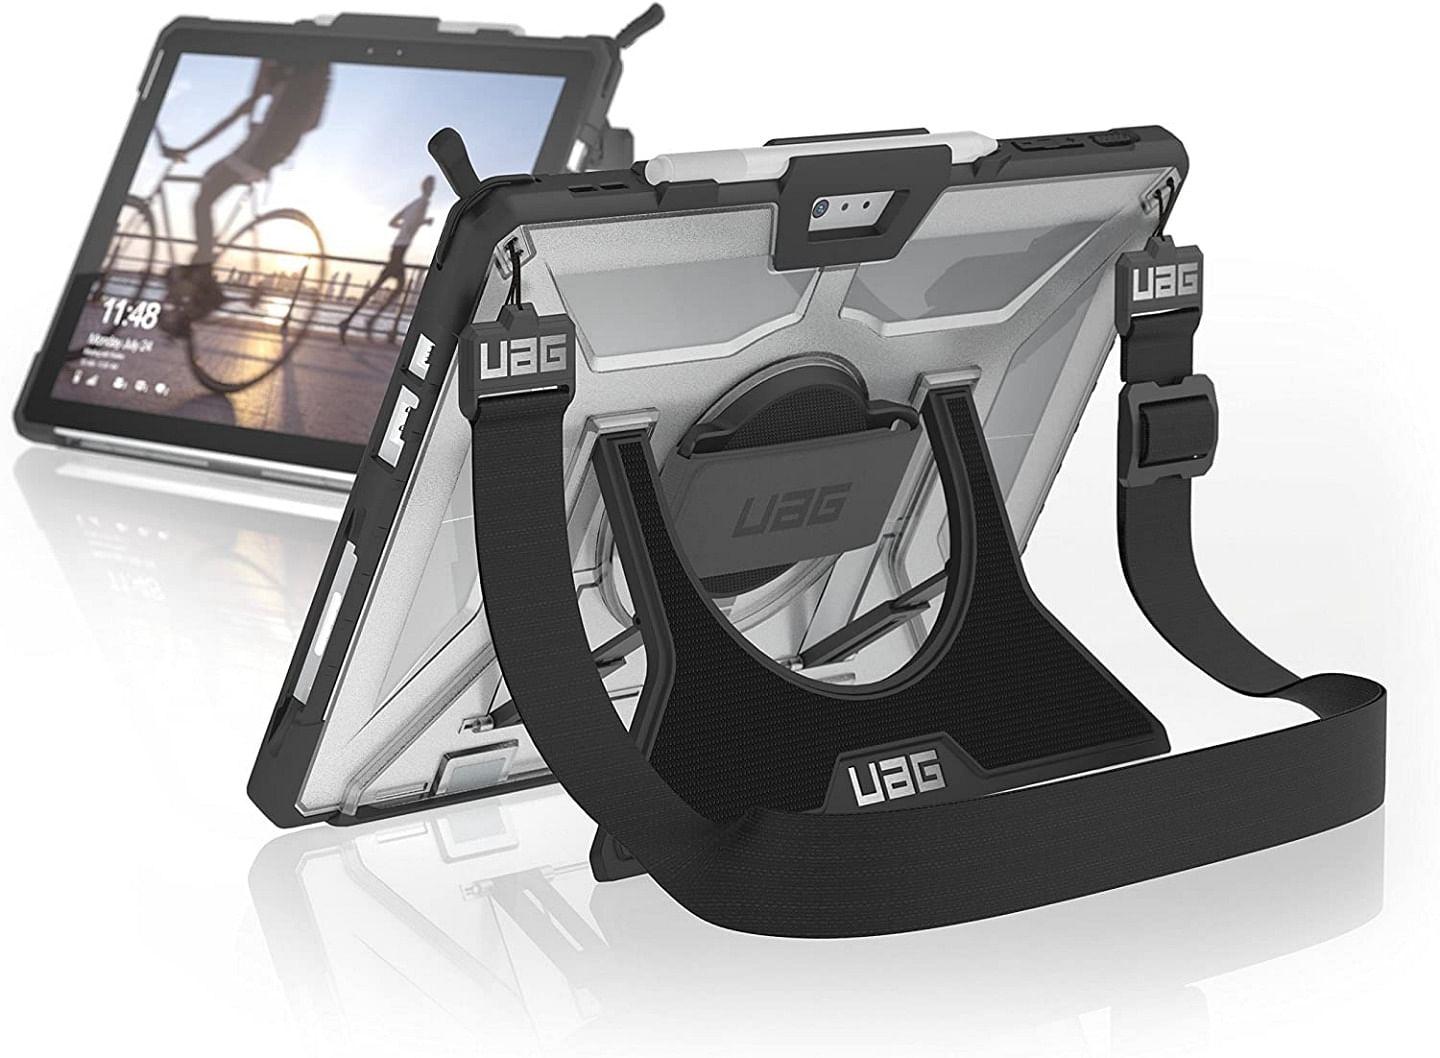 UAG Plasma Series Case For Microsoft Surface Pro 4/5/6/7/7+ With Shoulder/Hand Strap - Ice/Black